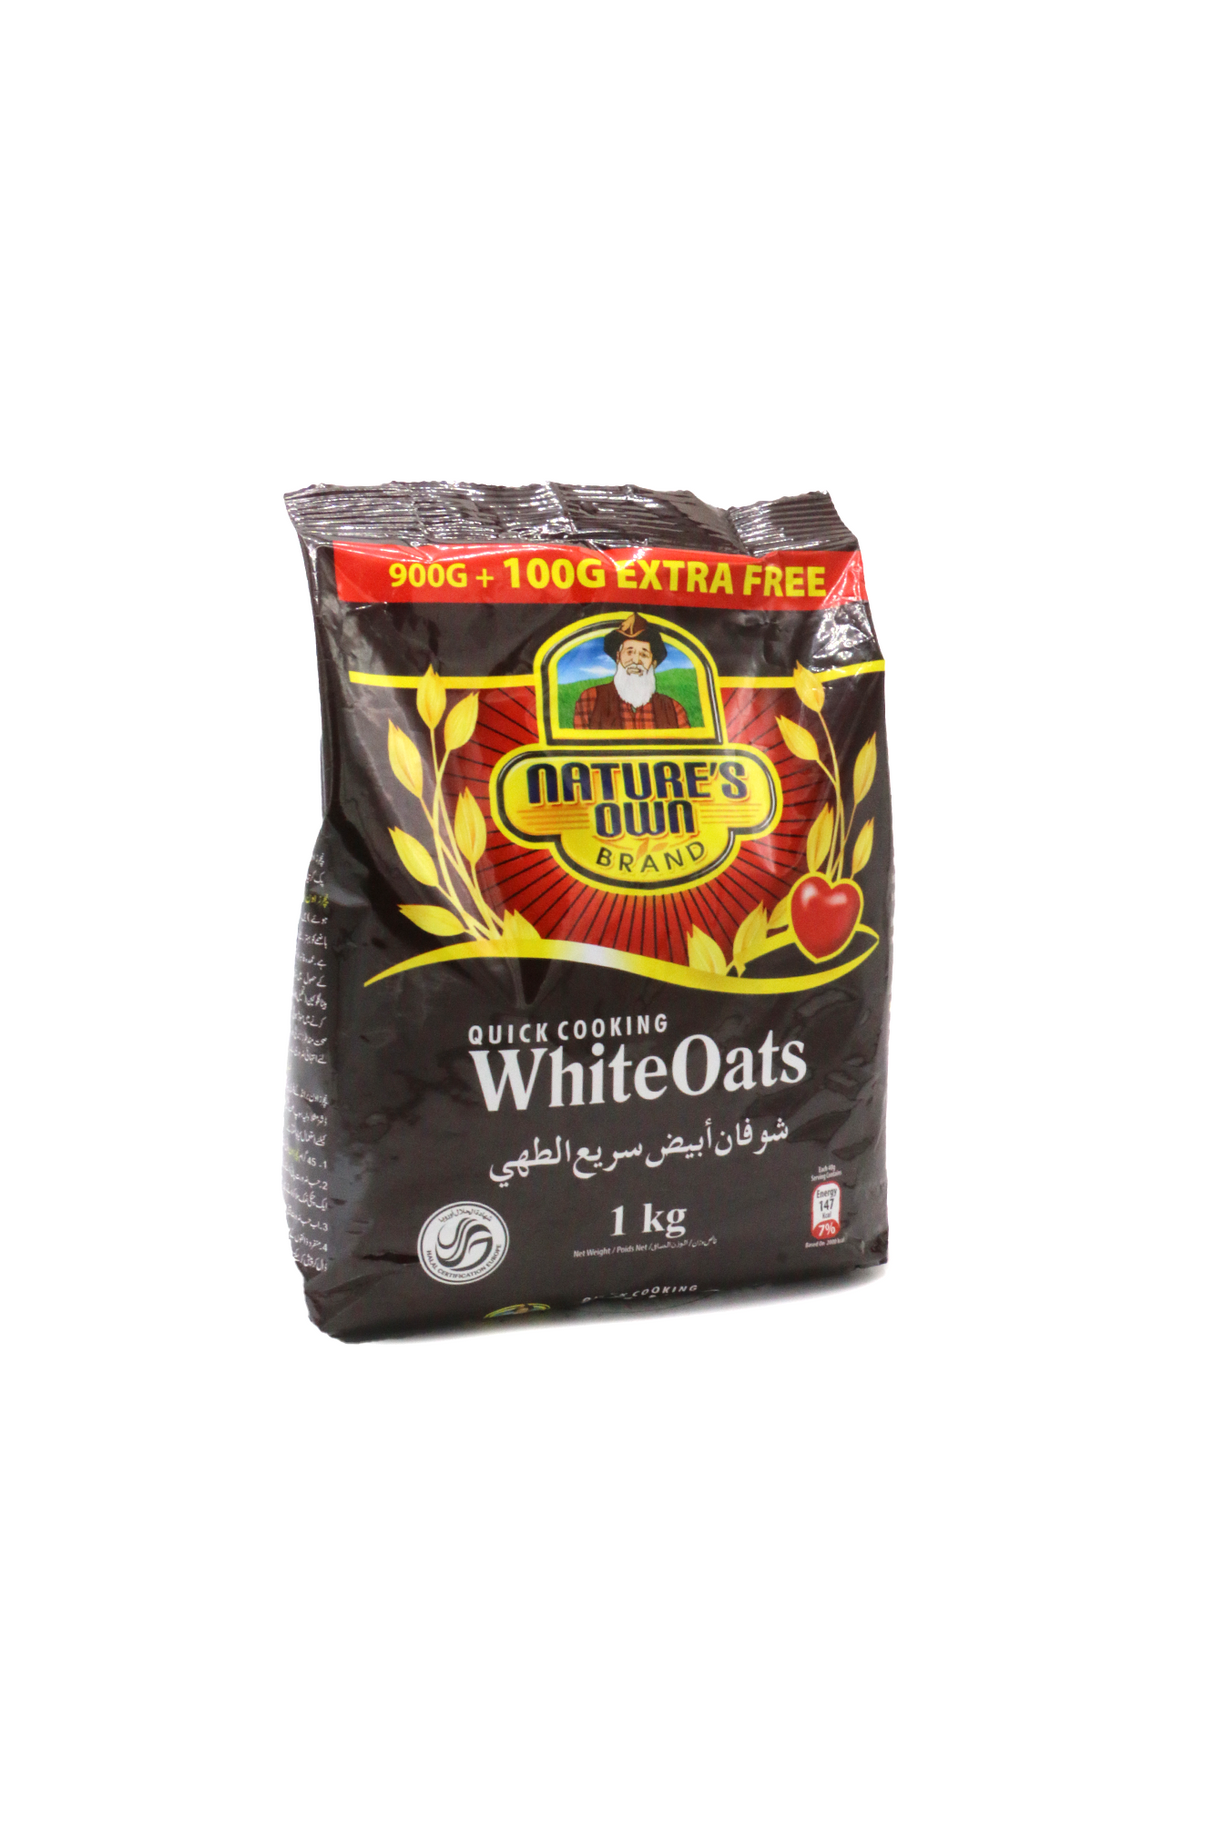 natures own white oats 1kg